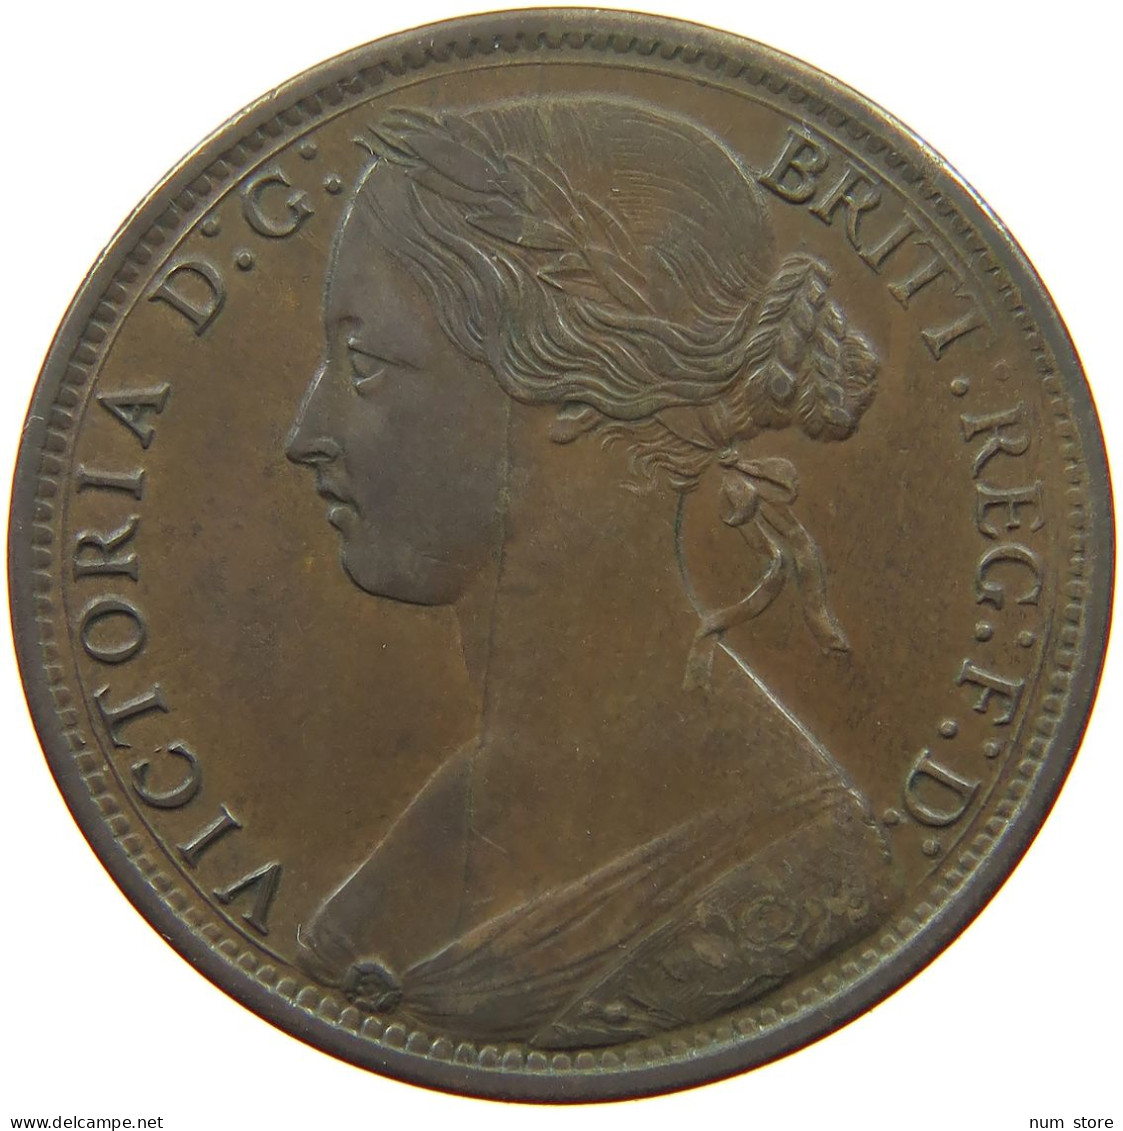 GREAT BRITAIN PENNY 1870 Victoria 1837-1901 #t149 0027 - D. 1 Penny